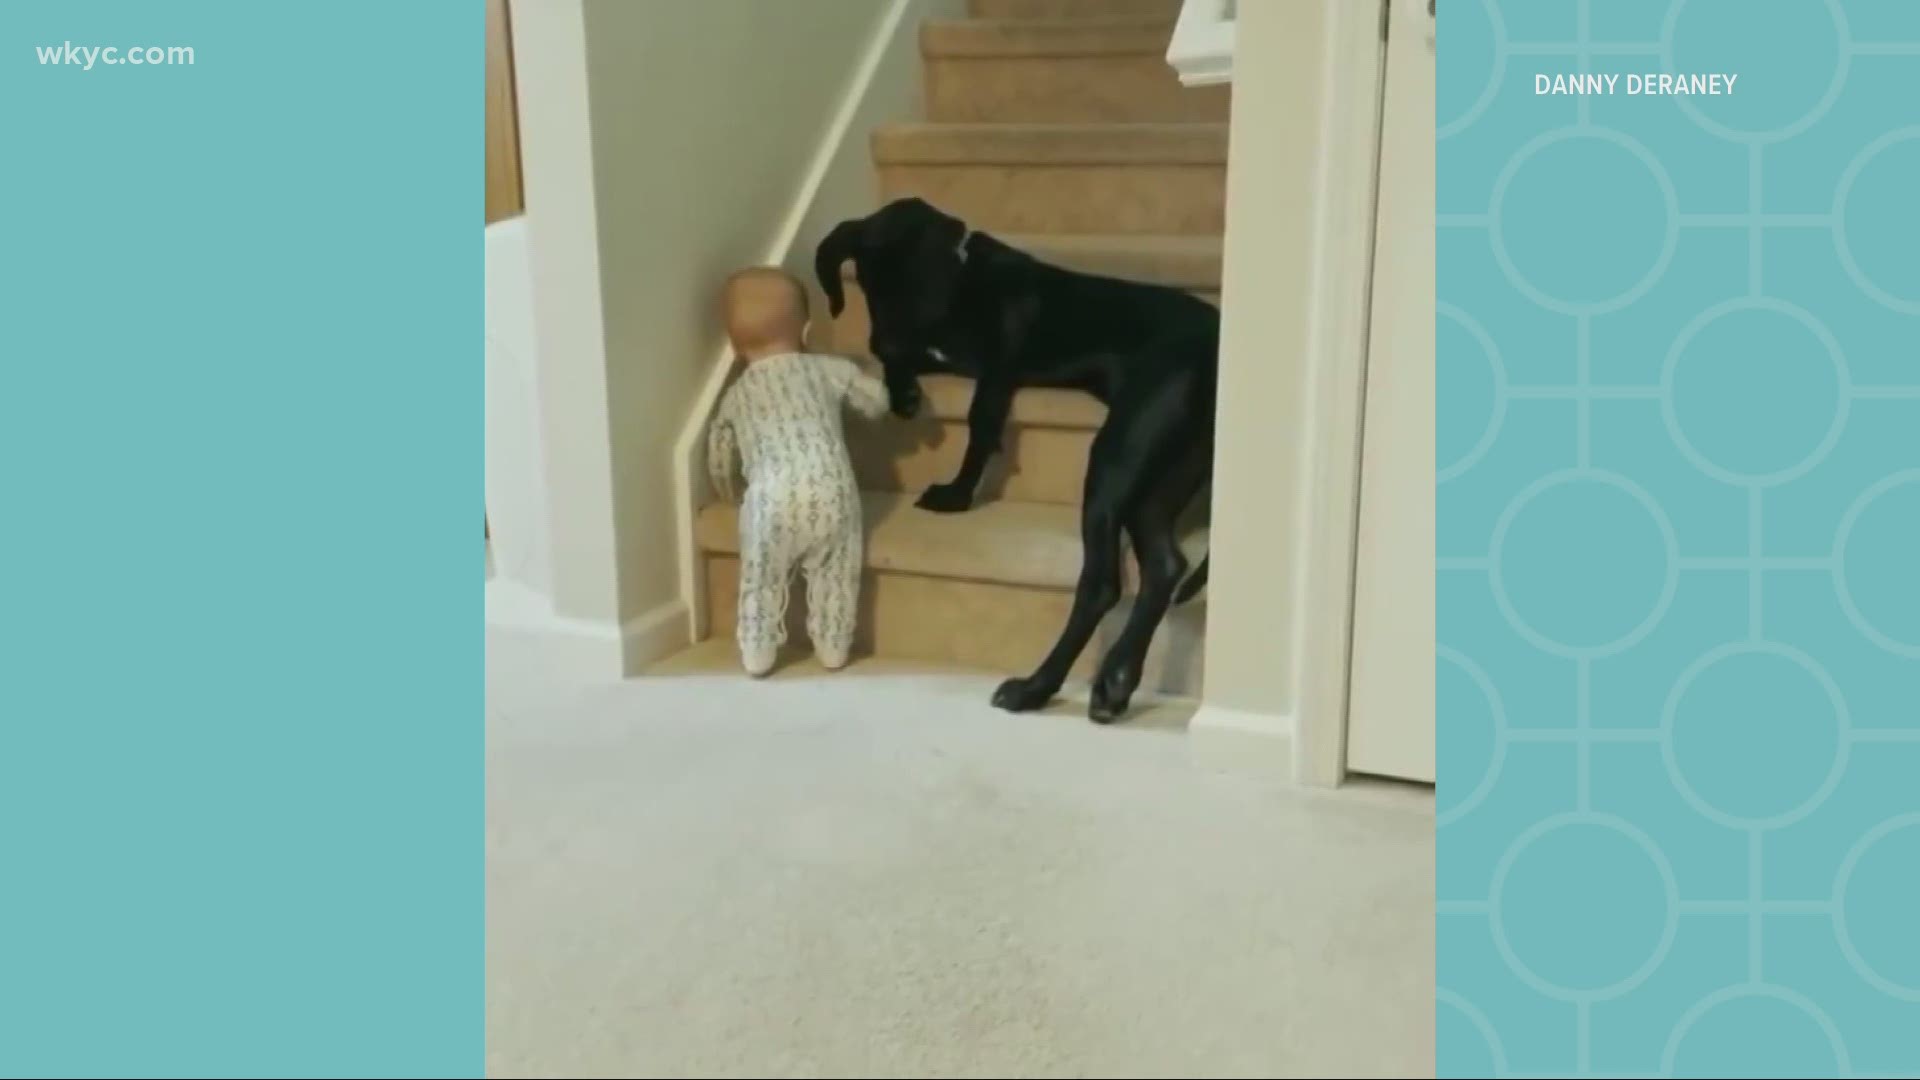 This dog is truly amazing as he blocks a toddler from climbing up the stairs.